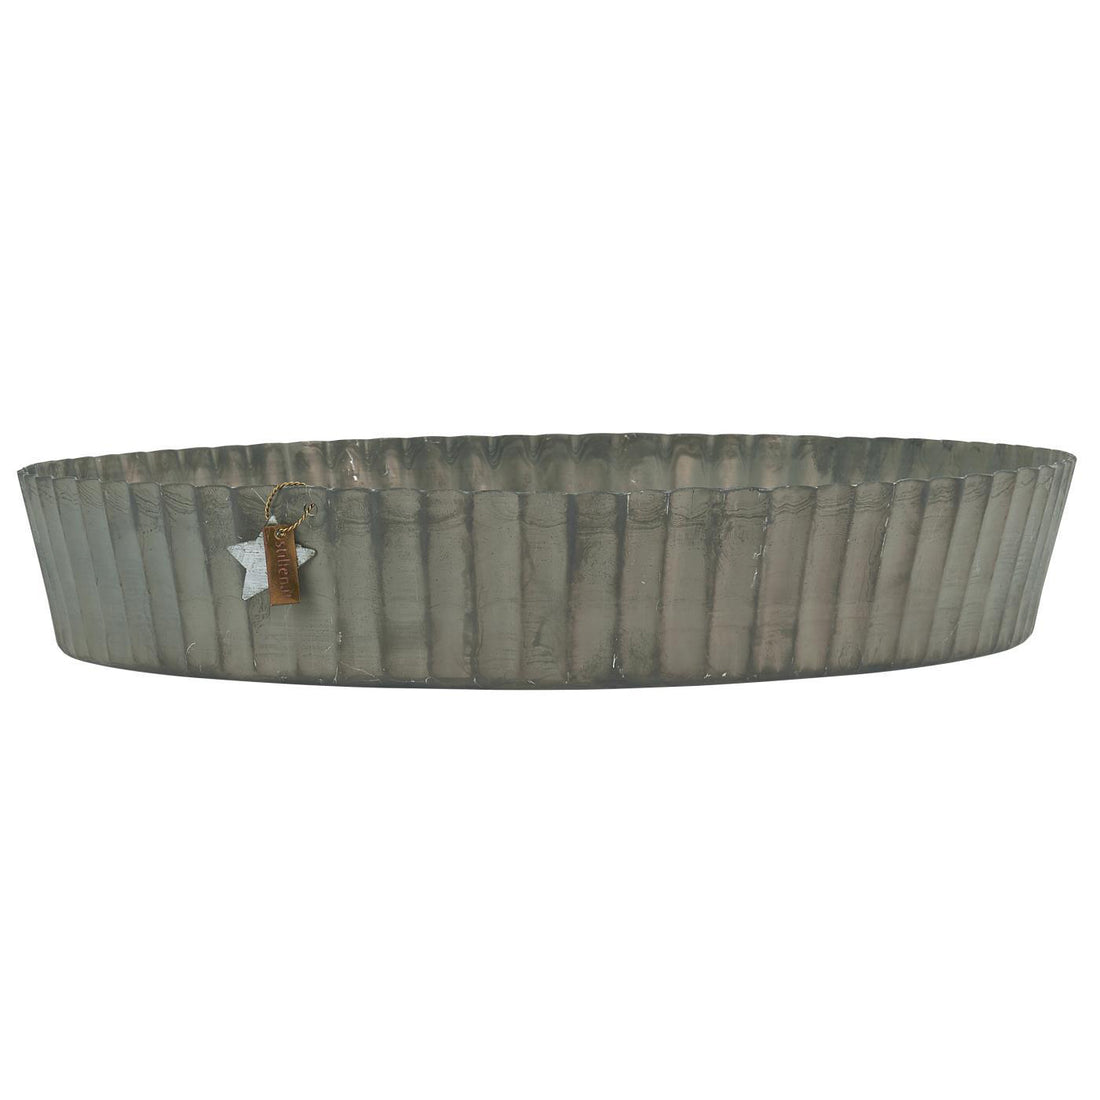 METAL DECORATIVE TRAY WITH GROOVED EDGE